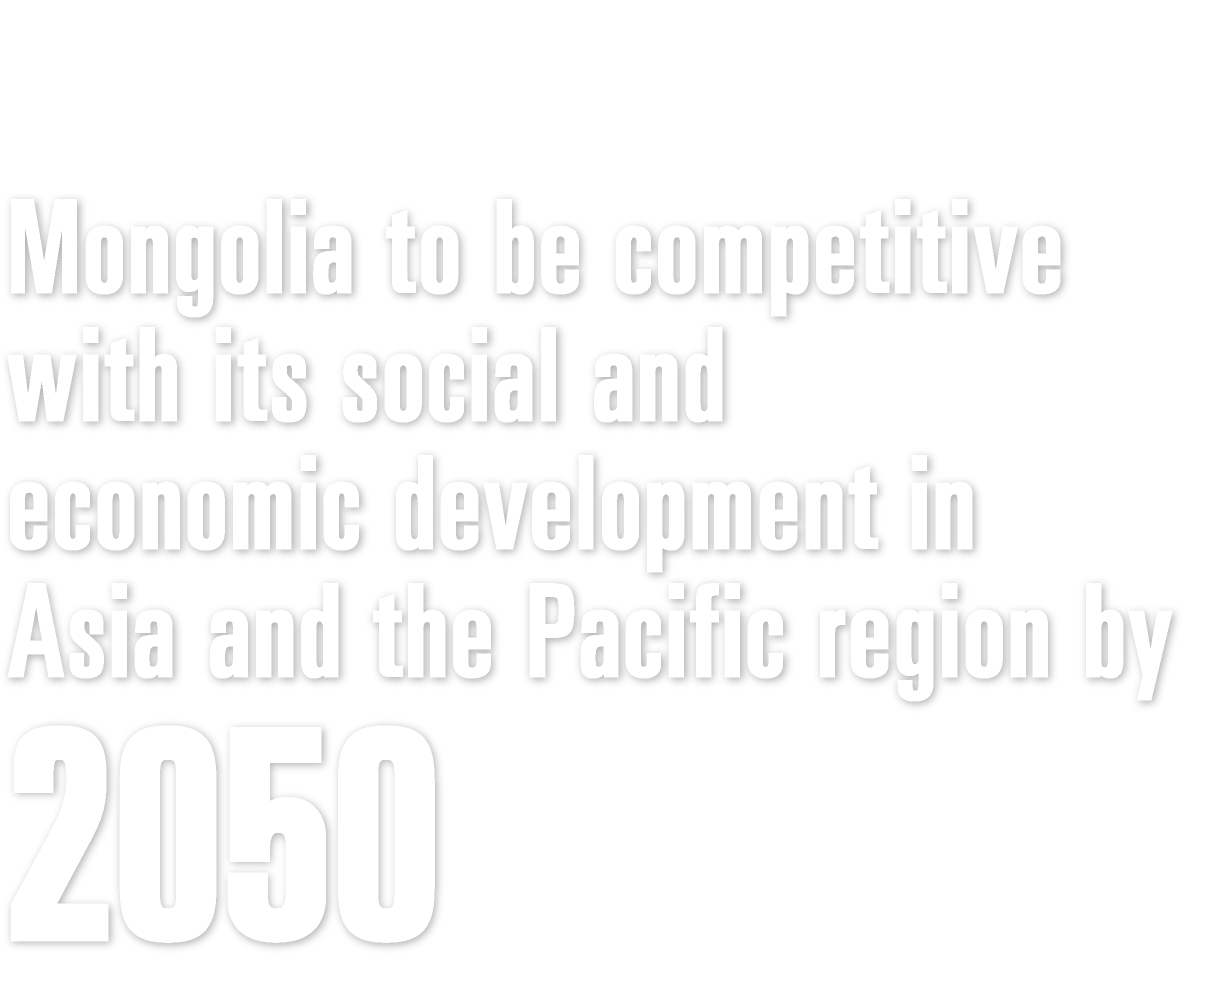 Mongolia to be competitive with its social and economic development in Asia and the Pacific region by2050